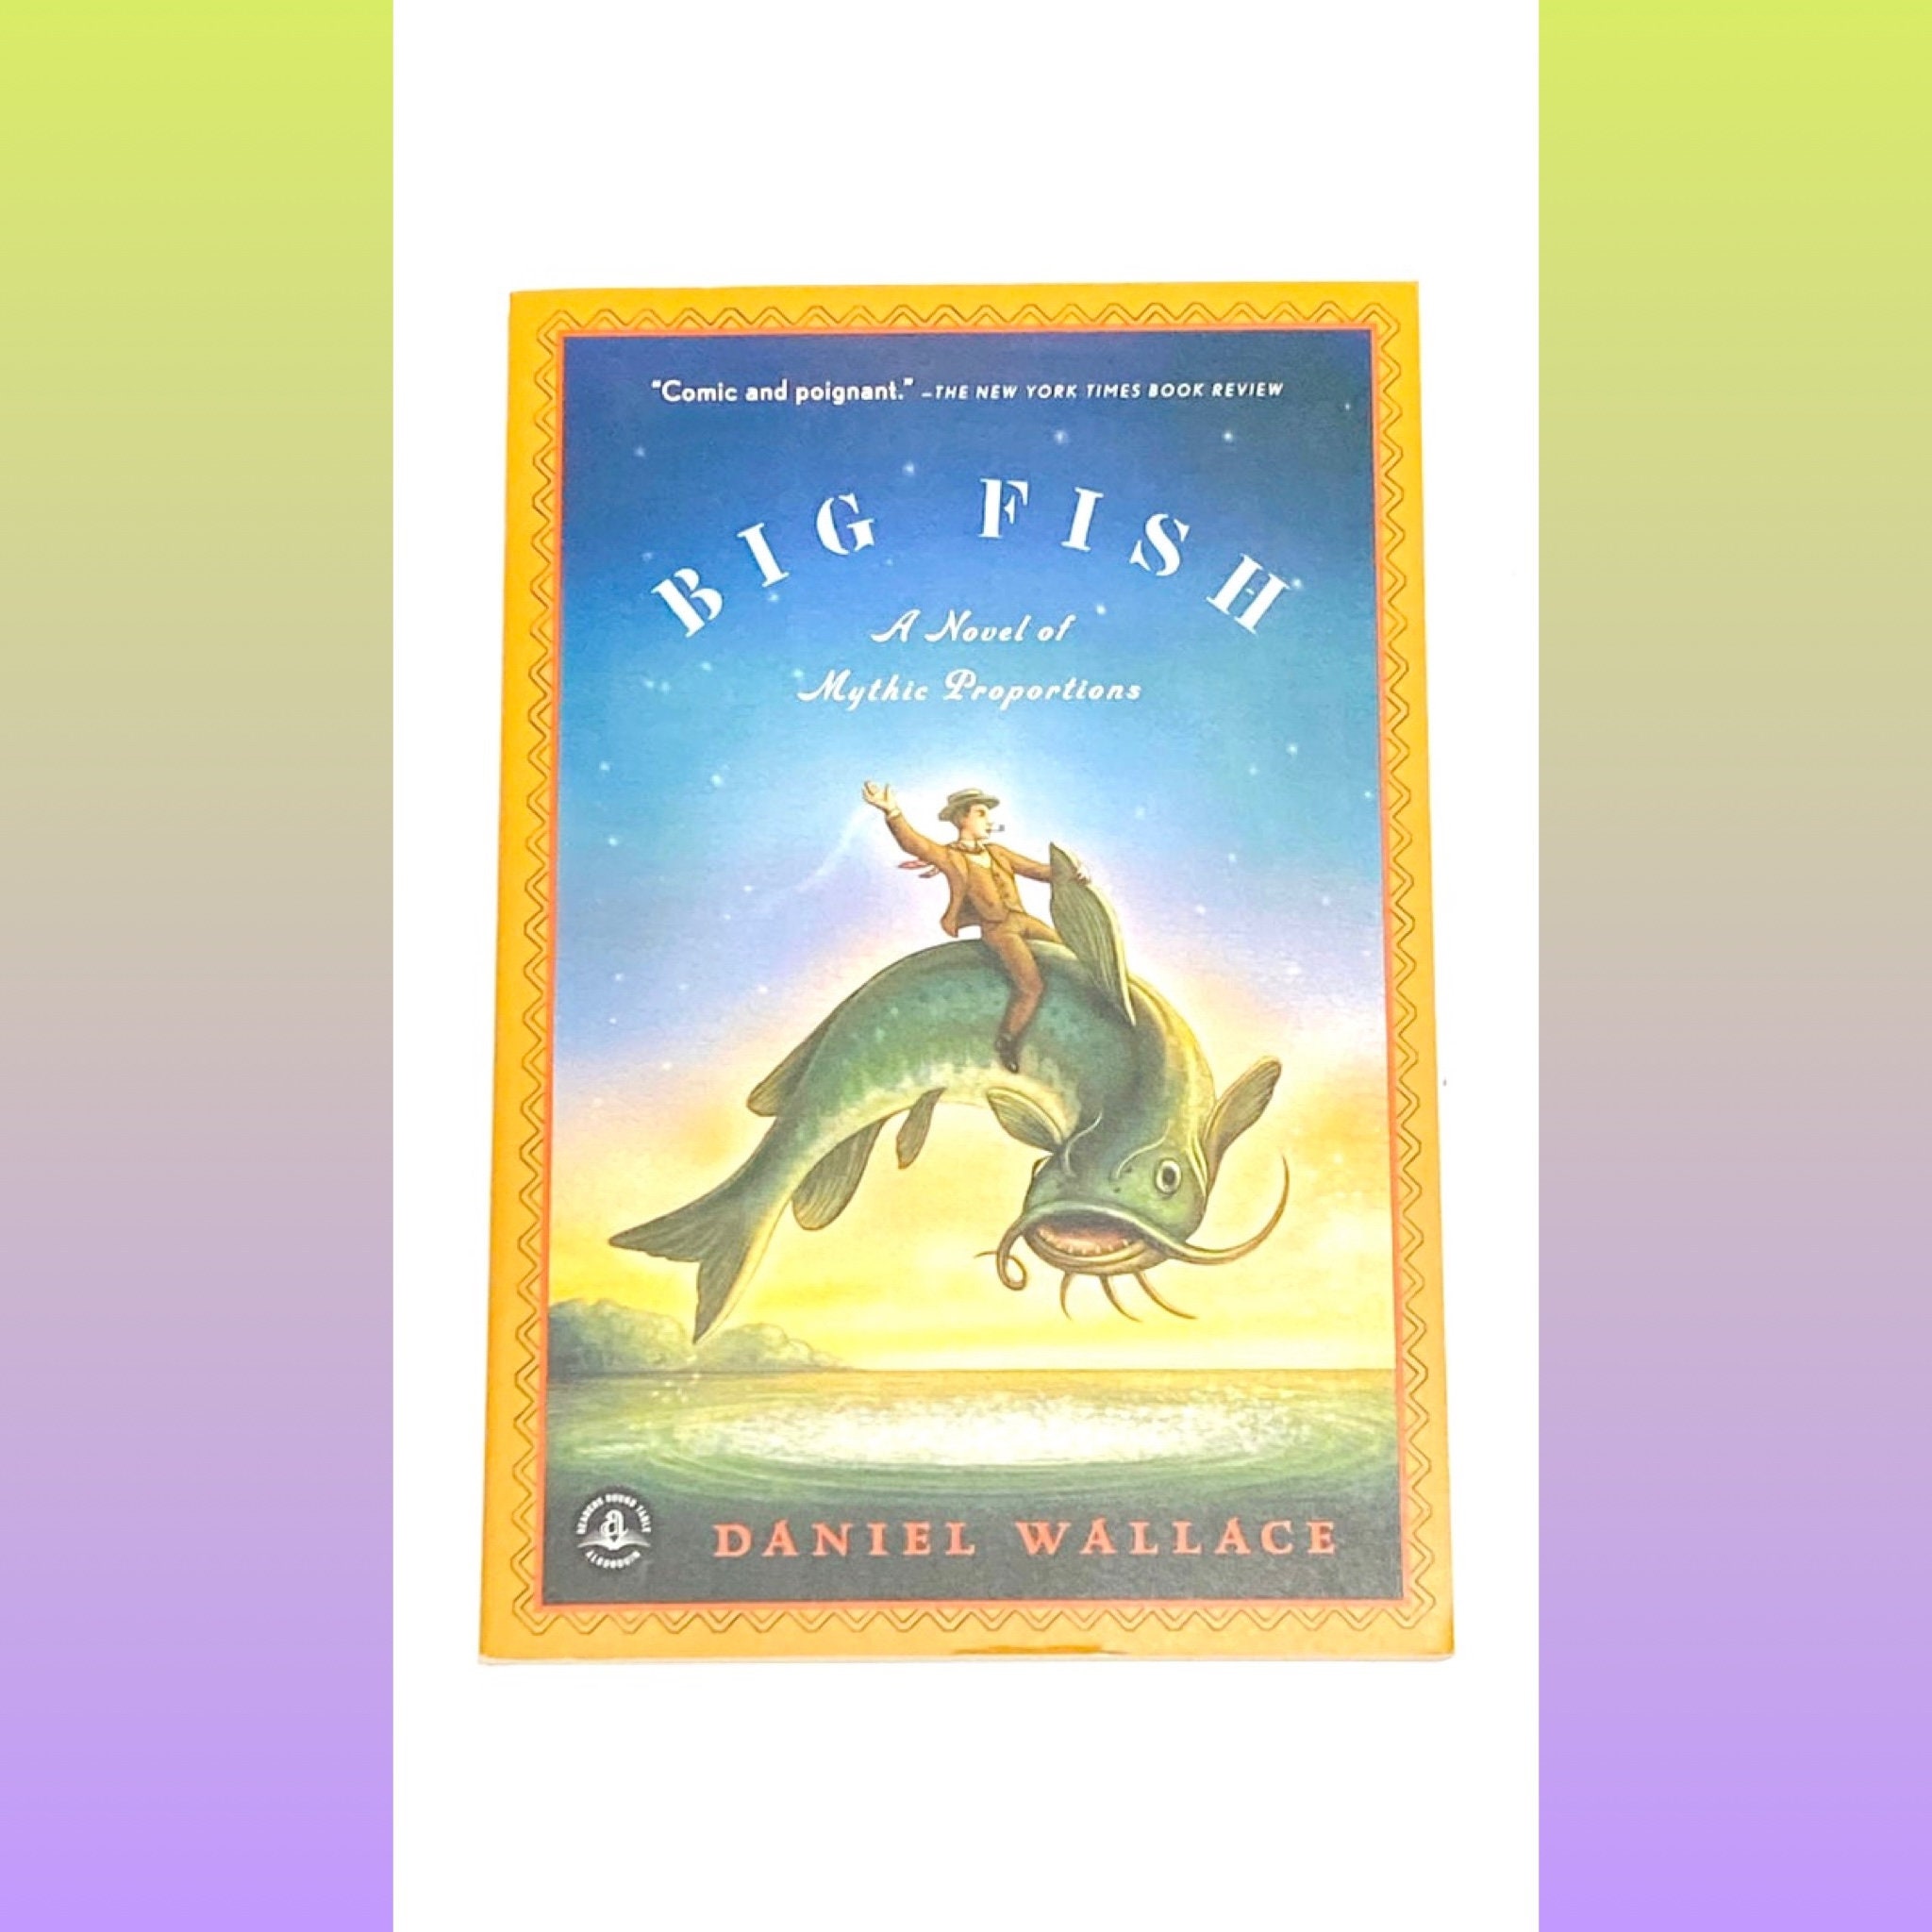 Big Fish Daniel Wallace Vintage Paperback Novel Classic Literature Pre  Owned Book Very Good Condition -  Sweden